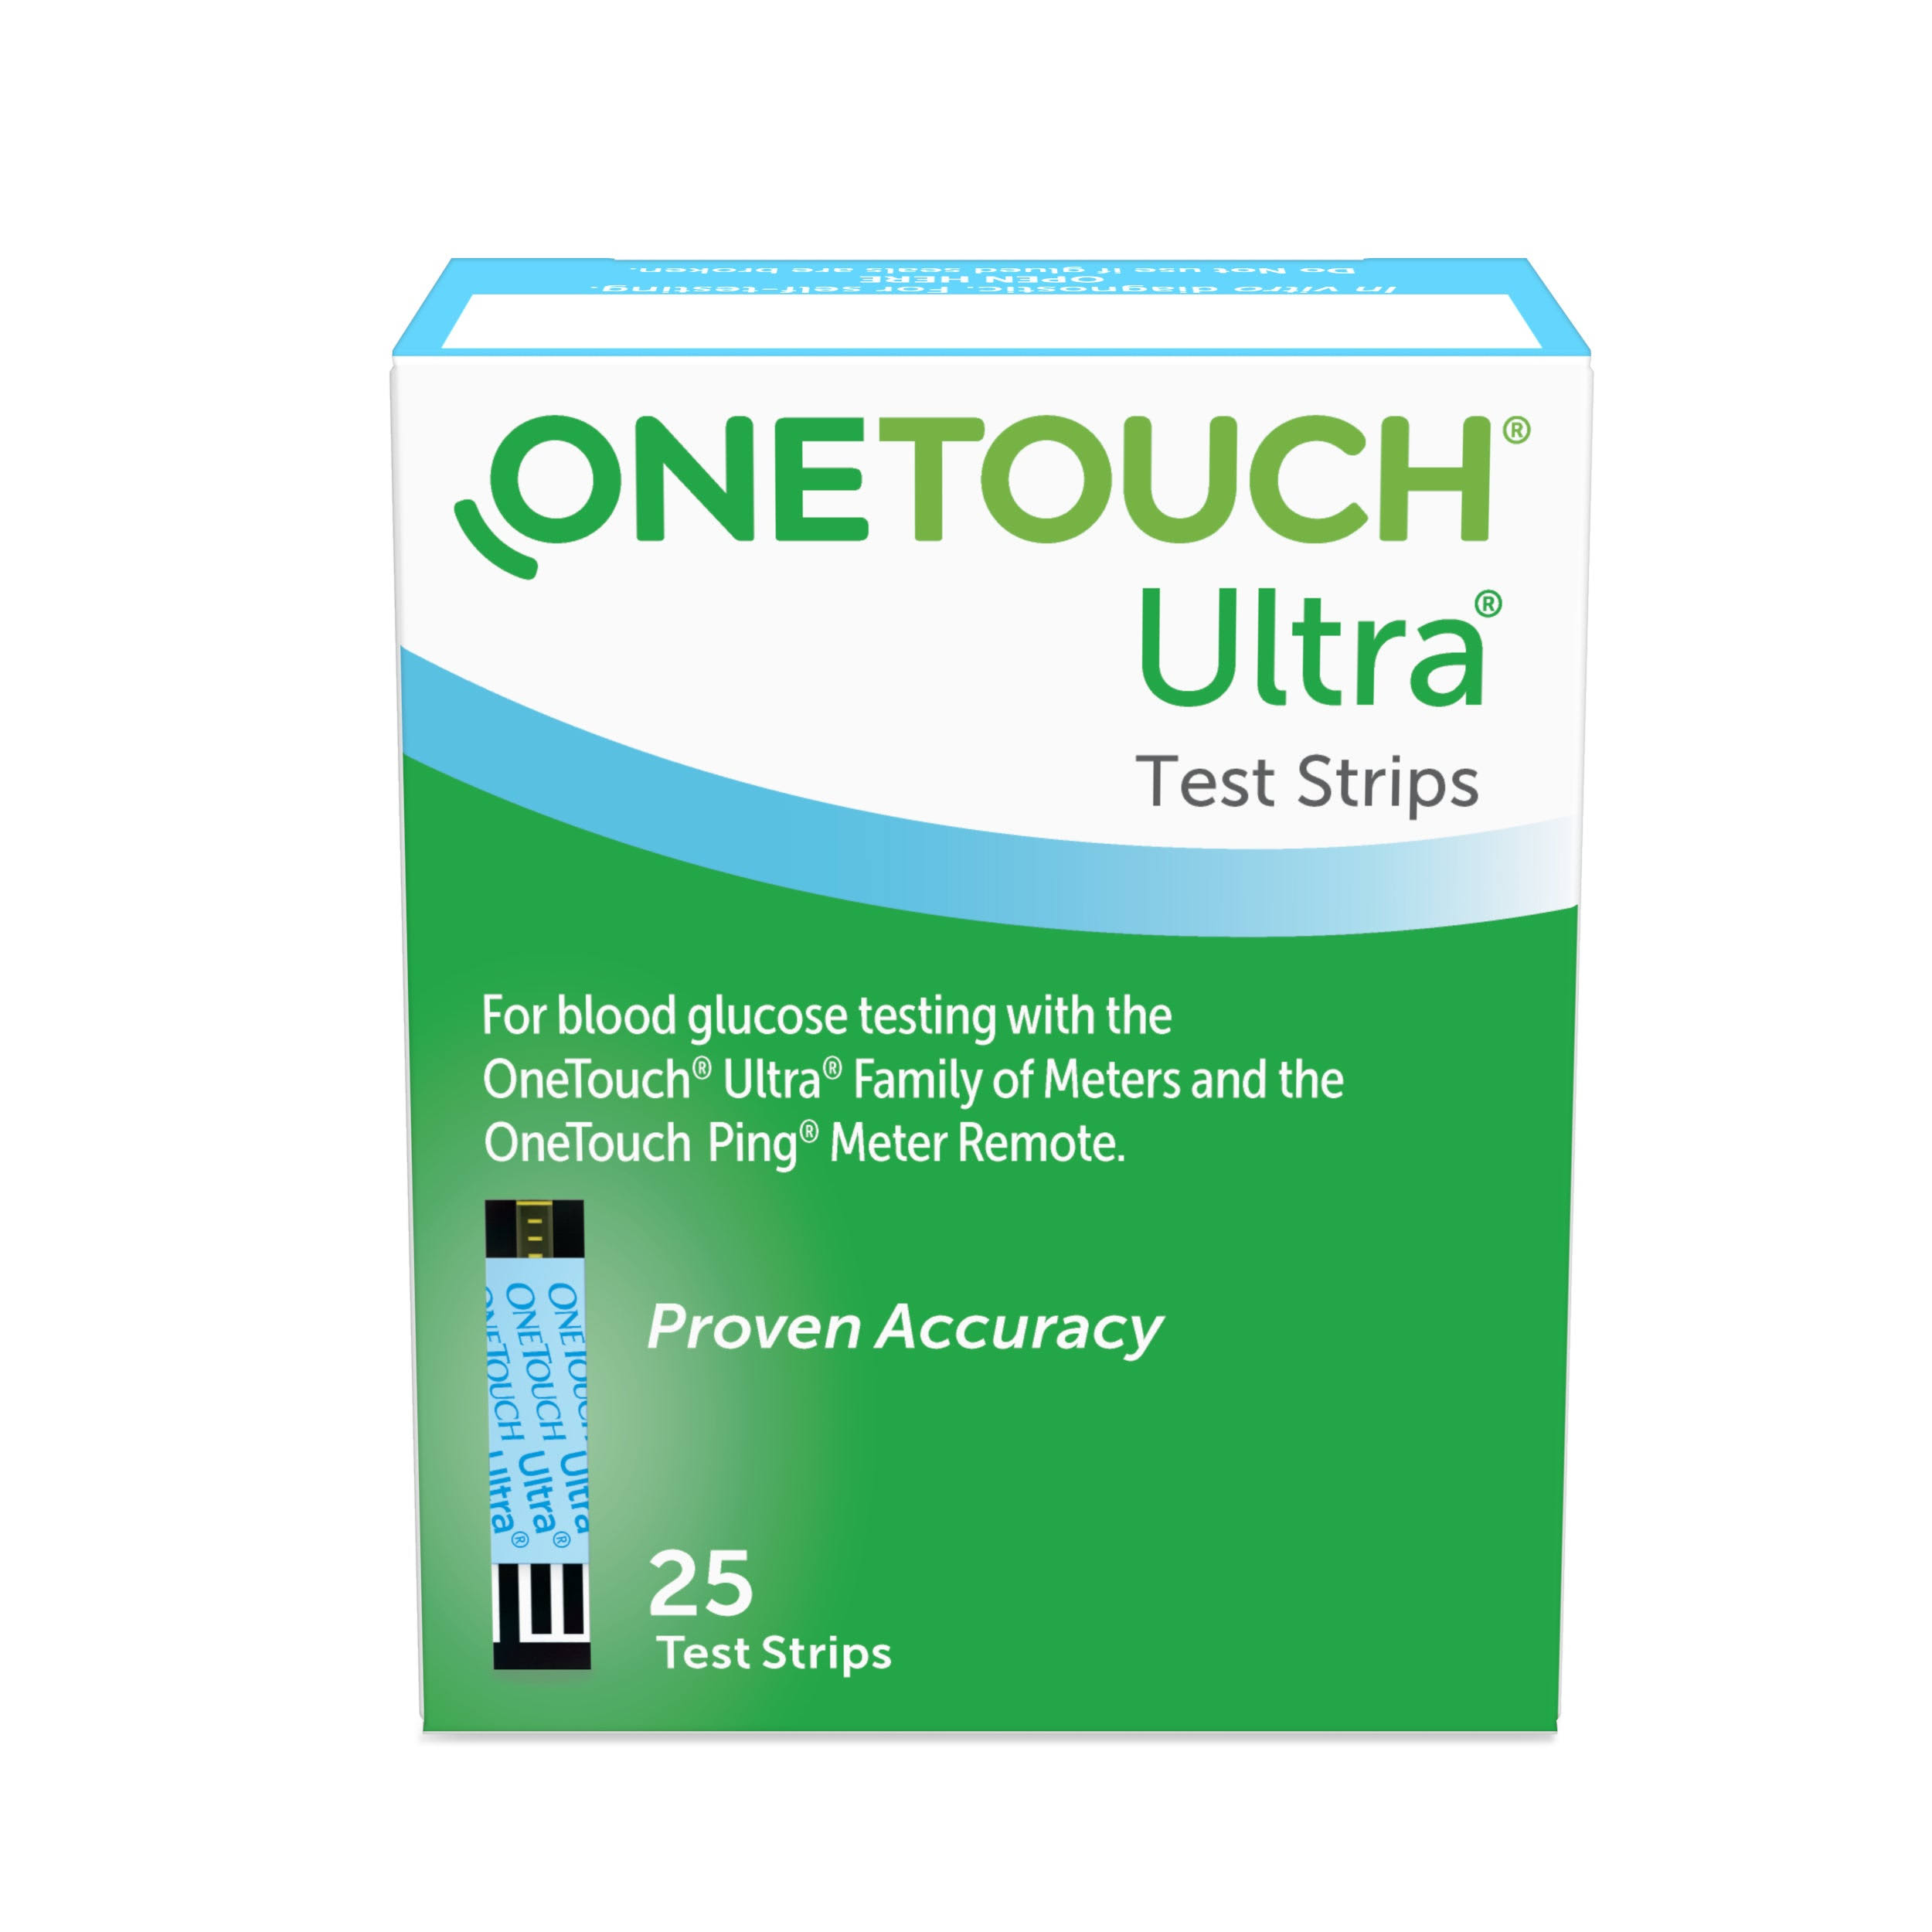 One Touch Ultra Blue Test Strips - 50 Test Strips